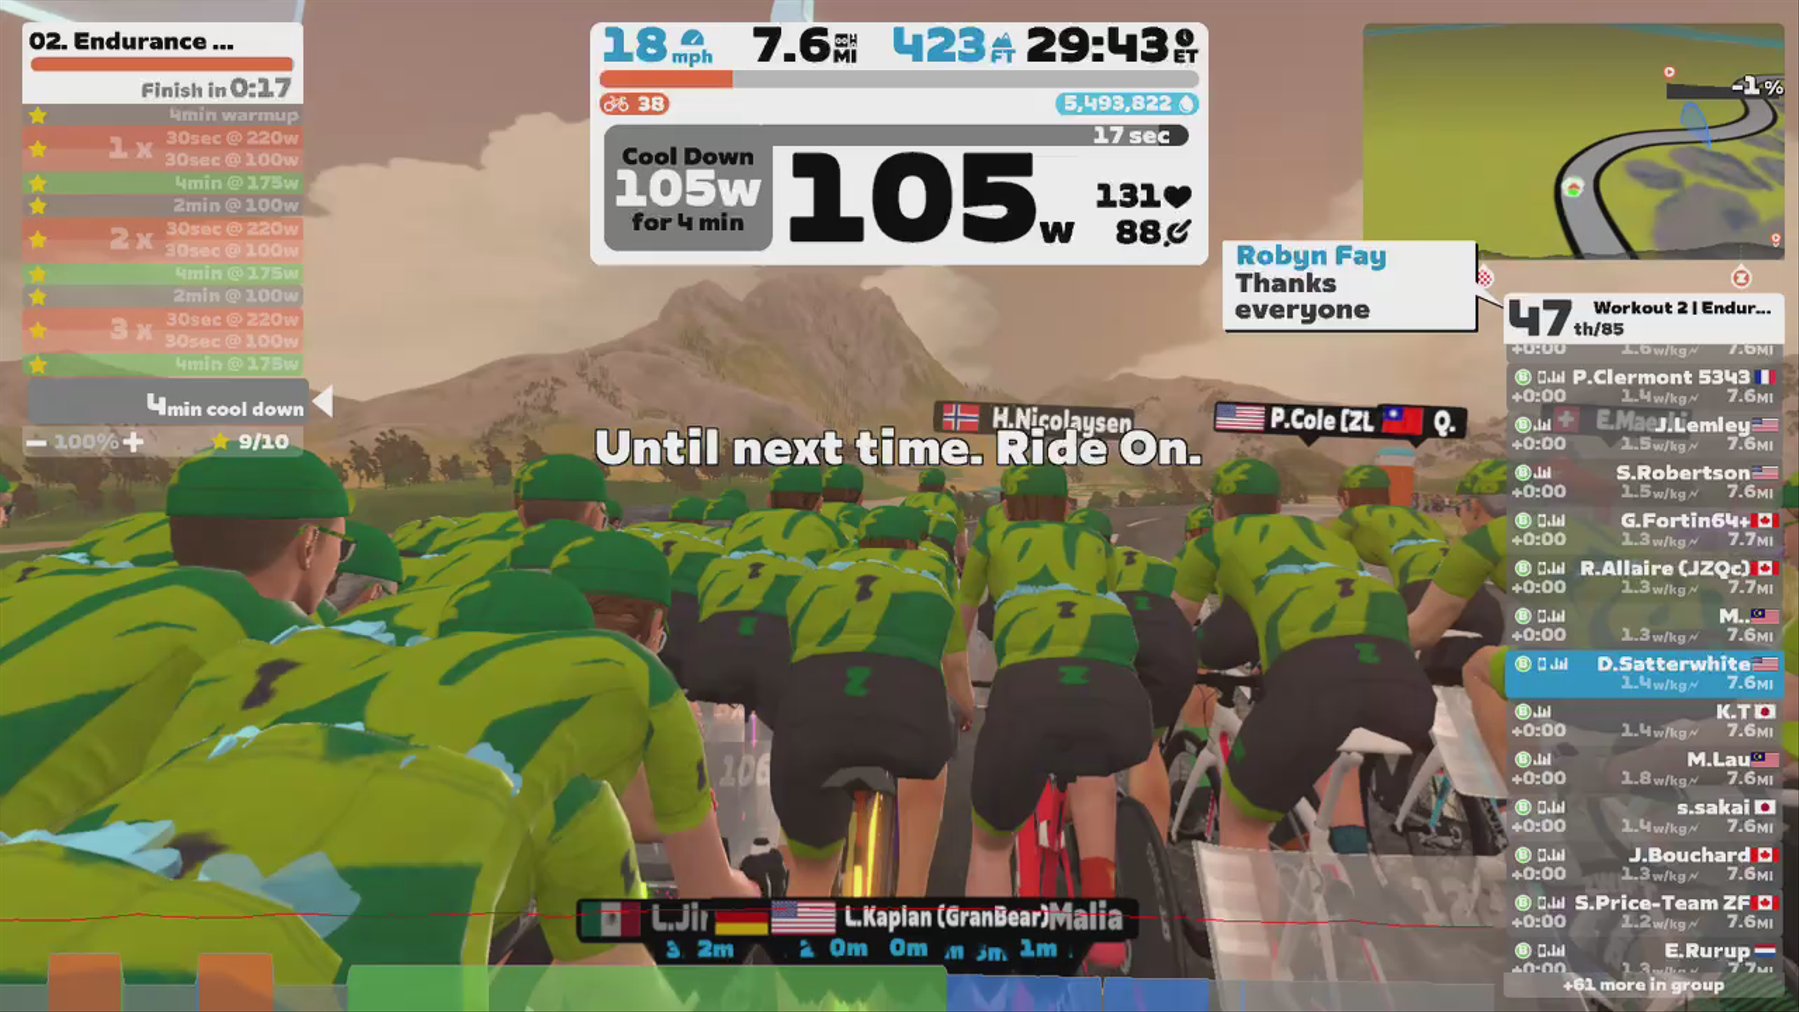 Zwift - Group Workout: Short - Endurance Escalator  on The Muckle Yin in Scotland